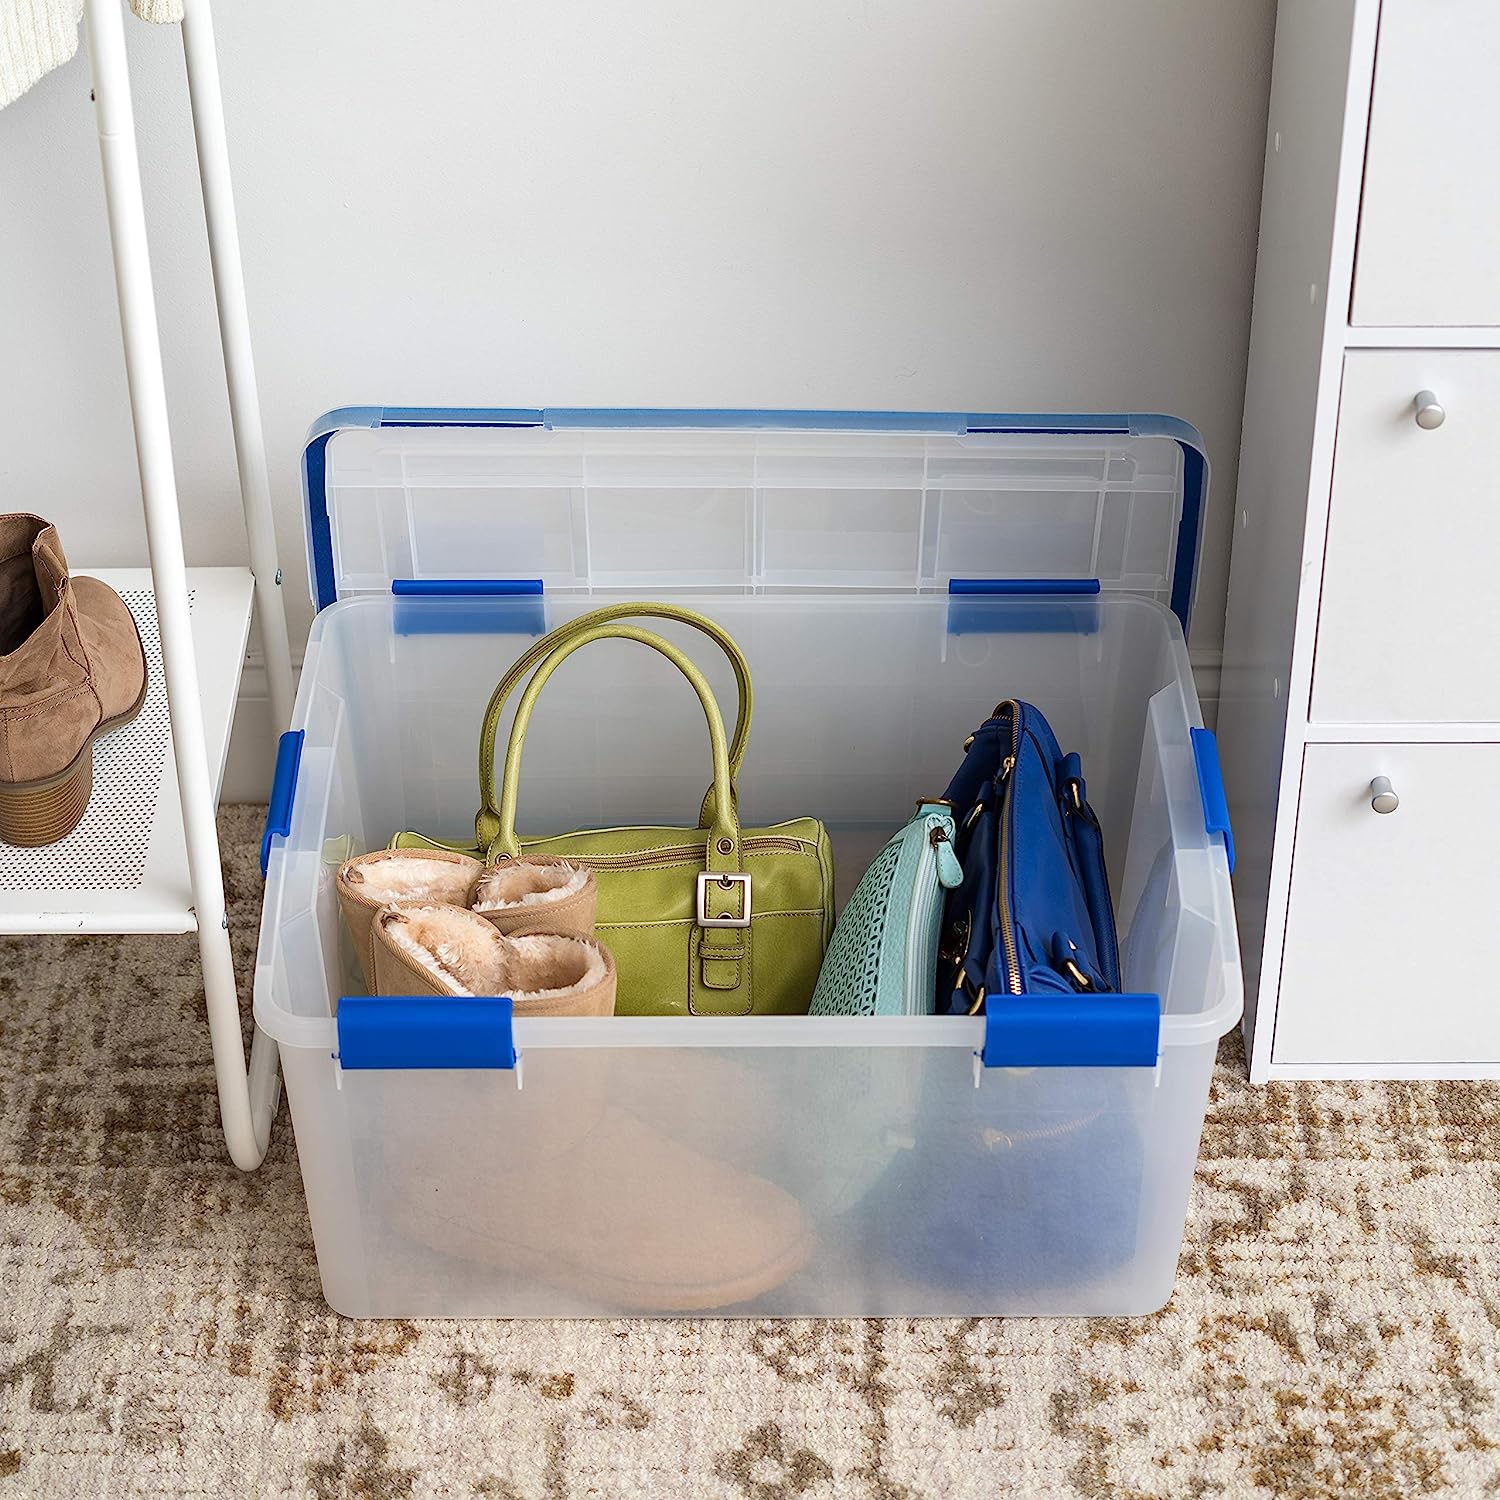 10 Best Waterproof Storage Containers For 2023 1688361819 